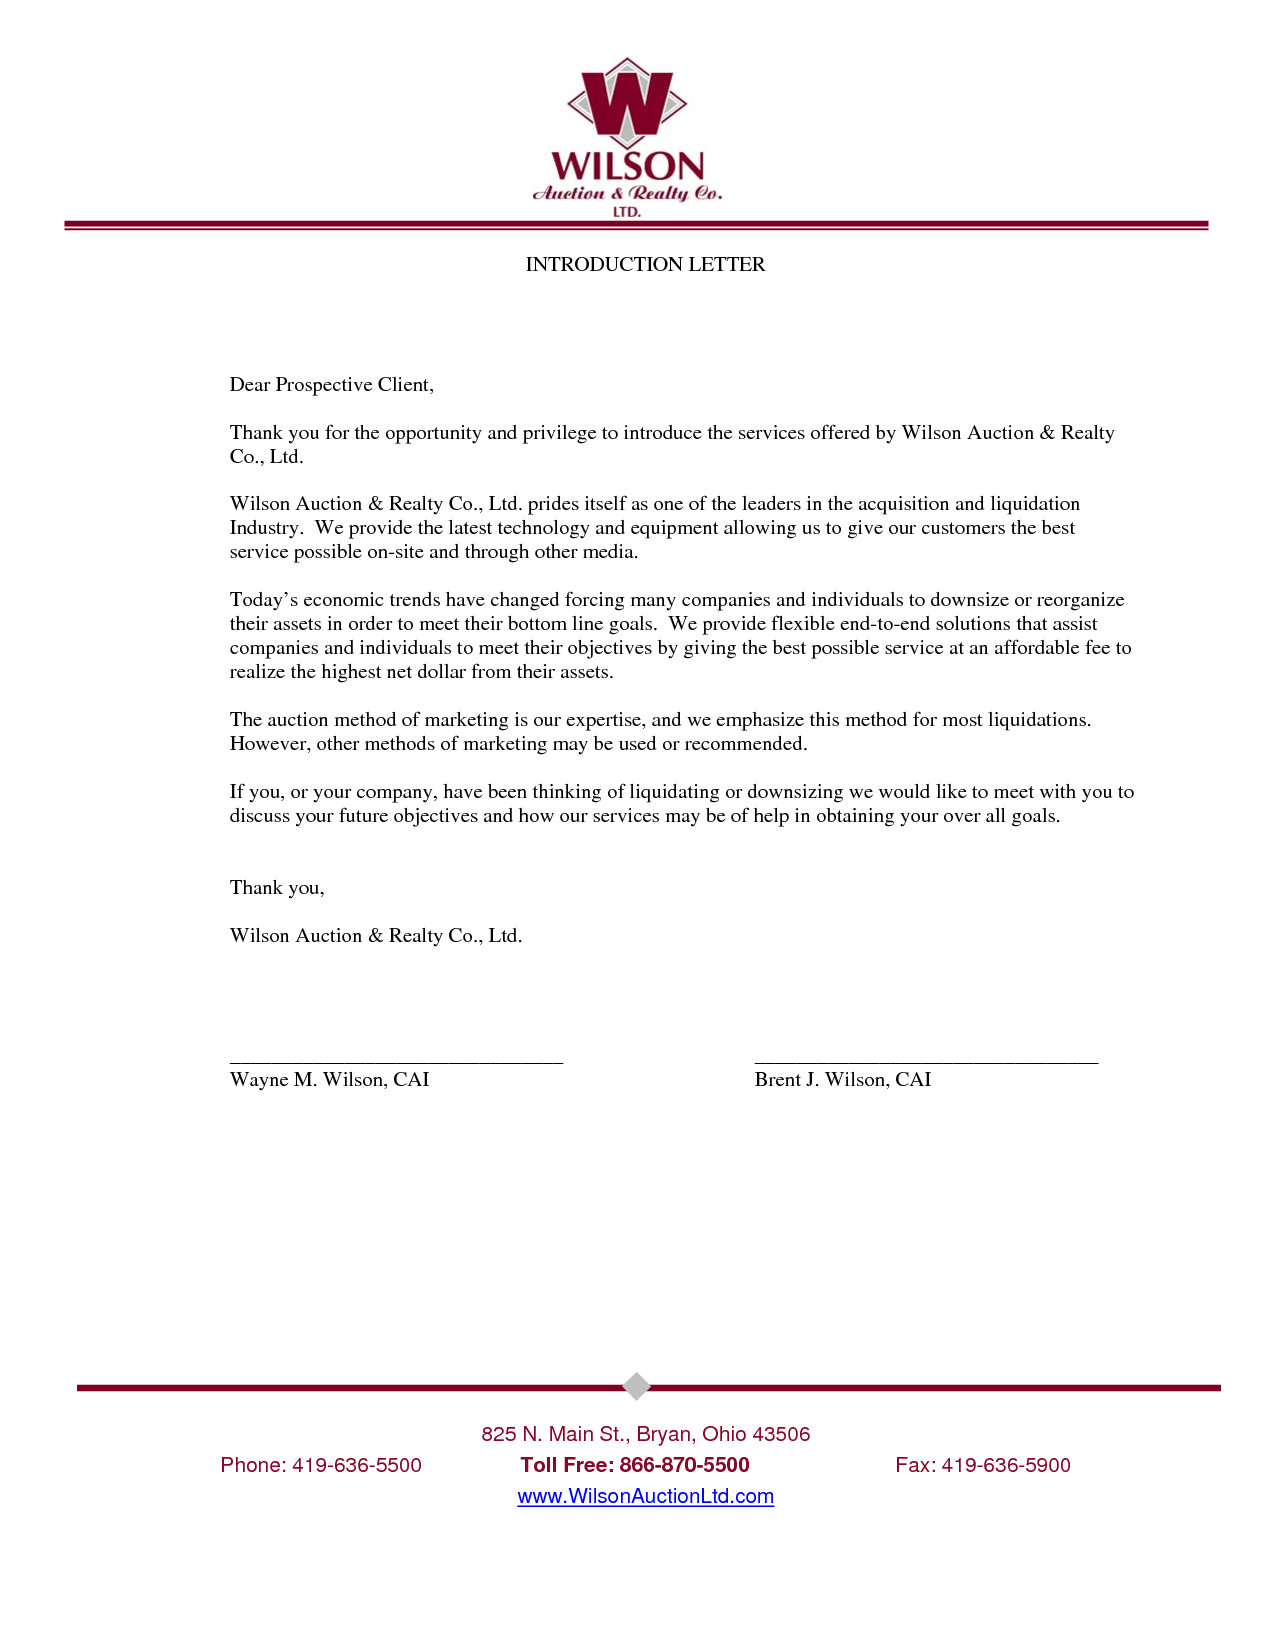 Business Introduction Letter Template Pany Introduction Letter for New Business